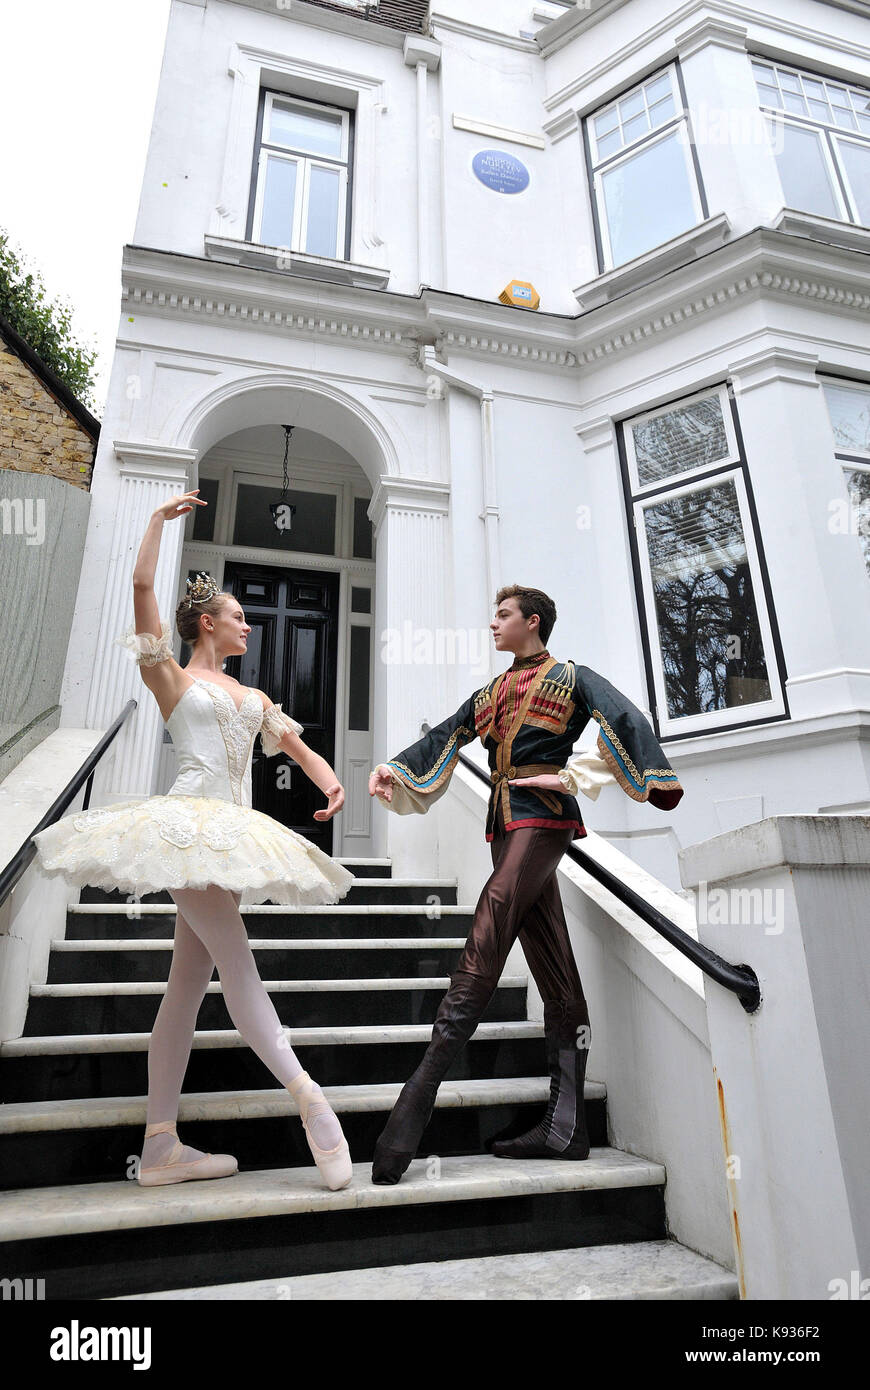 Dancers from the Royal Ballet School, Madison Bailey and Jordan Martinez,  who is wearing a costume from Rudolf Nureyev's own collection, pose during  the unveiling of an English Heritage blue plaque to